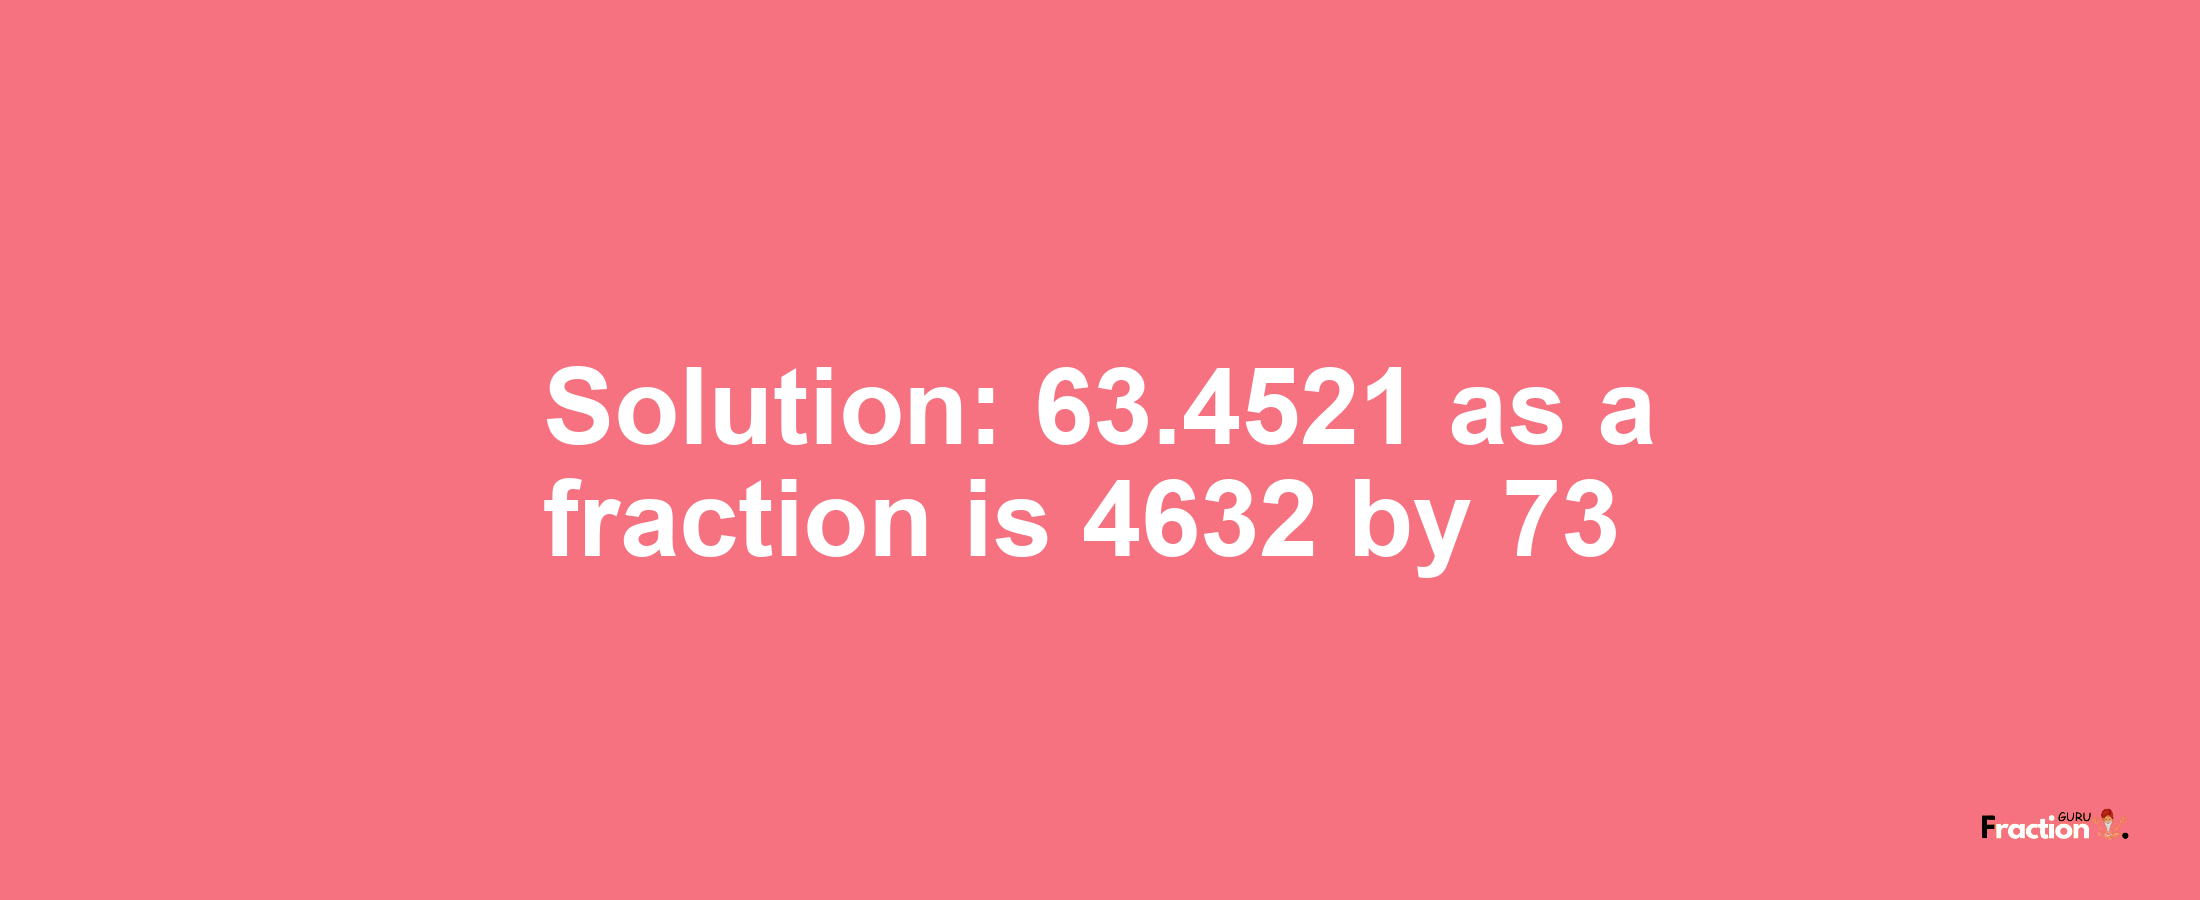 Solution:63.4521 as a fraction is 4632/73